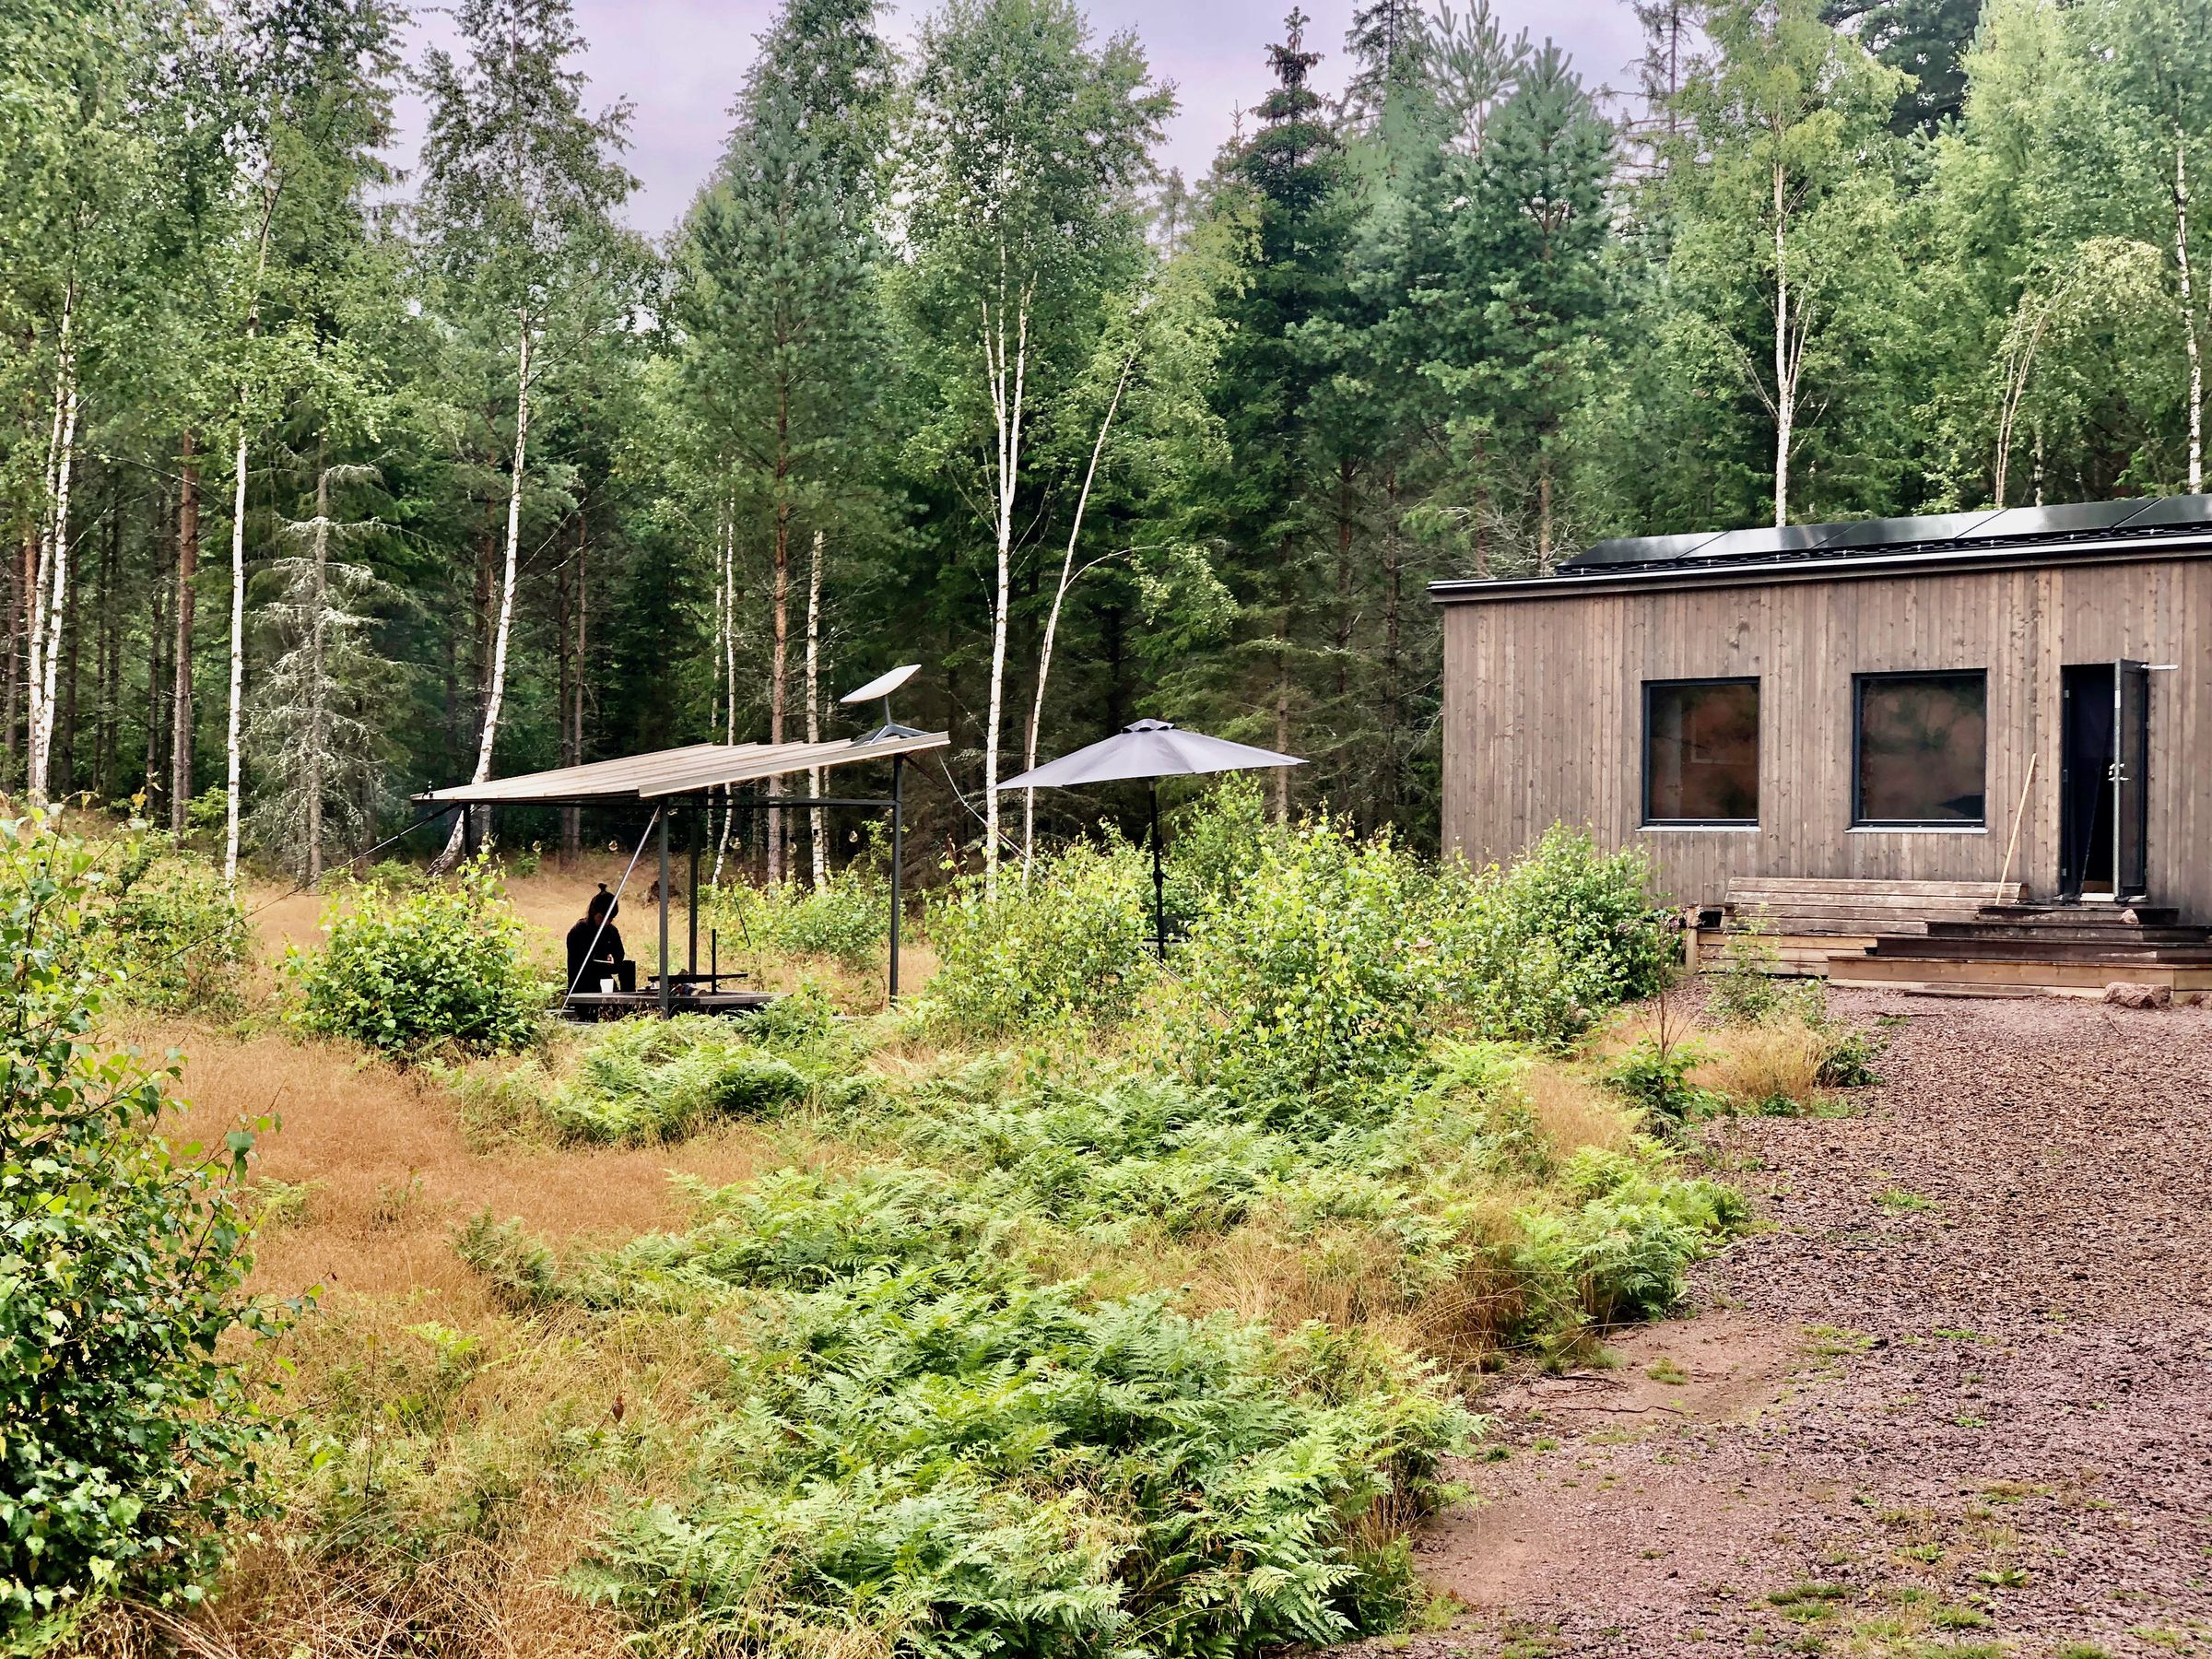 InForest cabins are completely off the grid, but that doesn’t mean you have to go without modern luxuries thanks to advances in solar power and Starlink internet. Can you spot the dish?